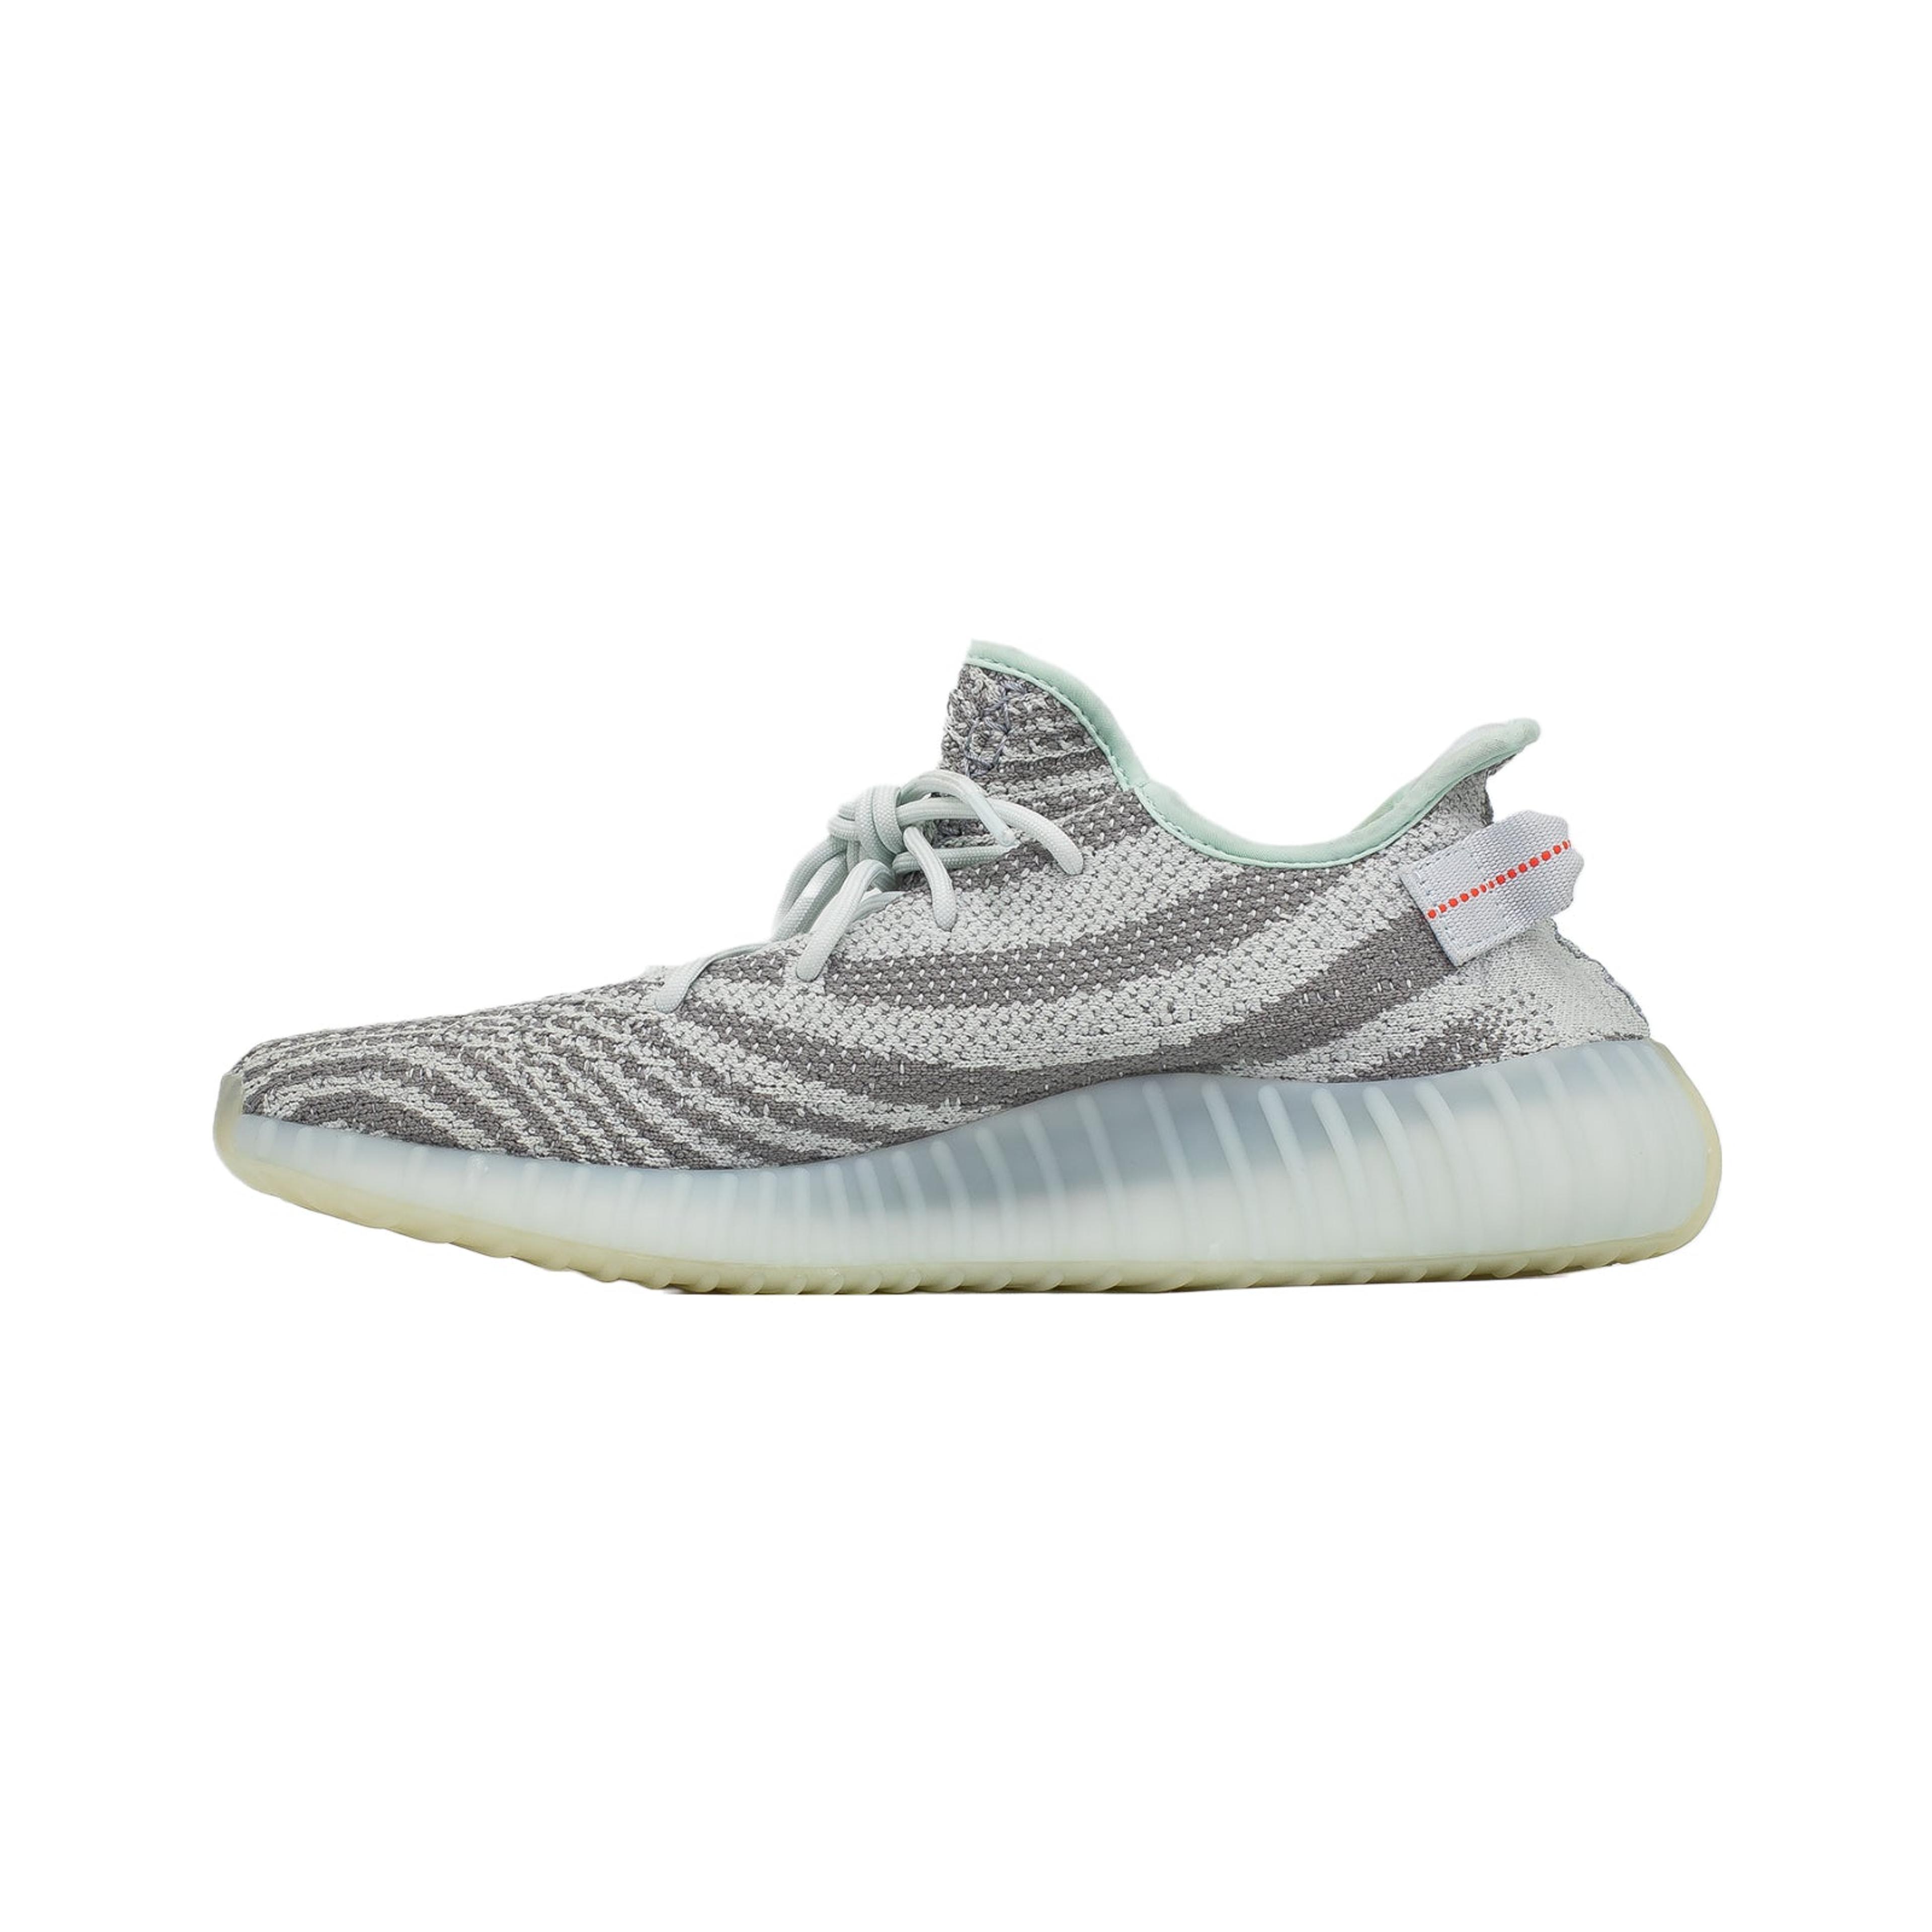 Alternate View 1 of Yeezy Boost 350 V2, Blue Tint